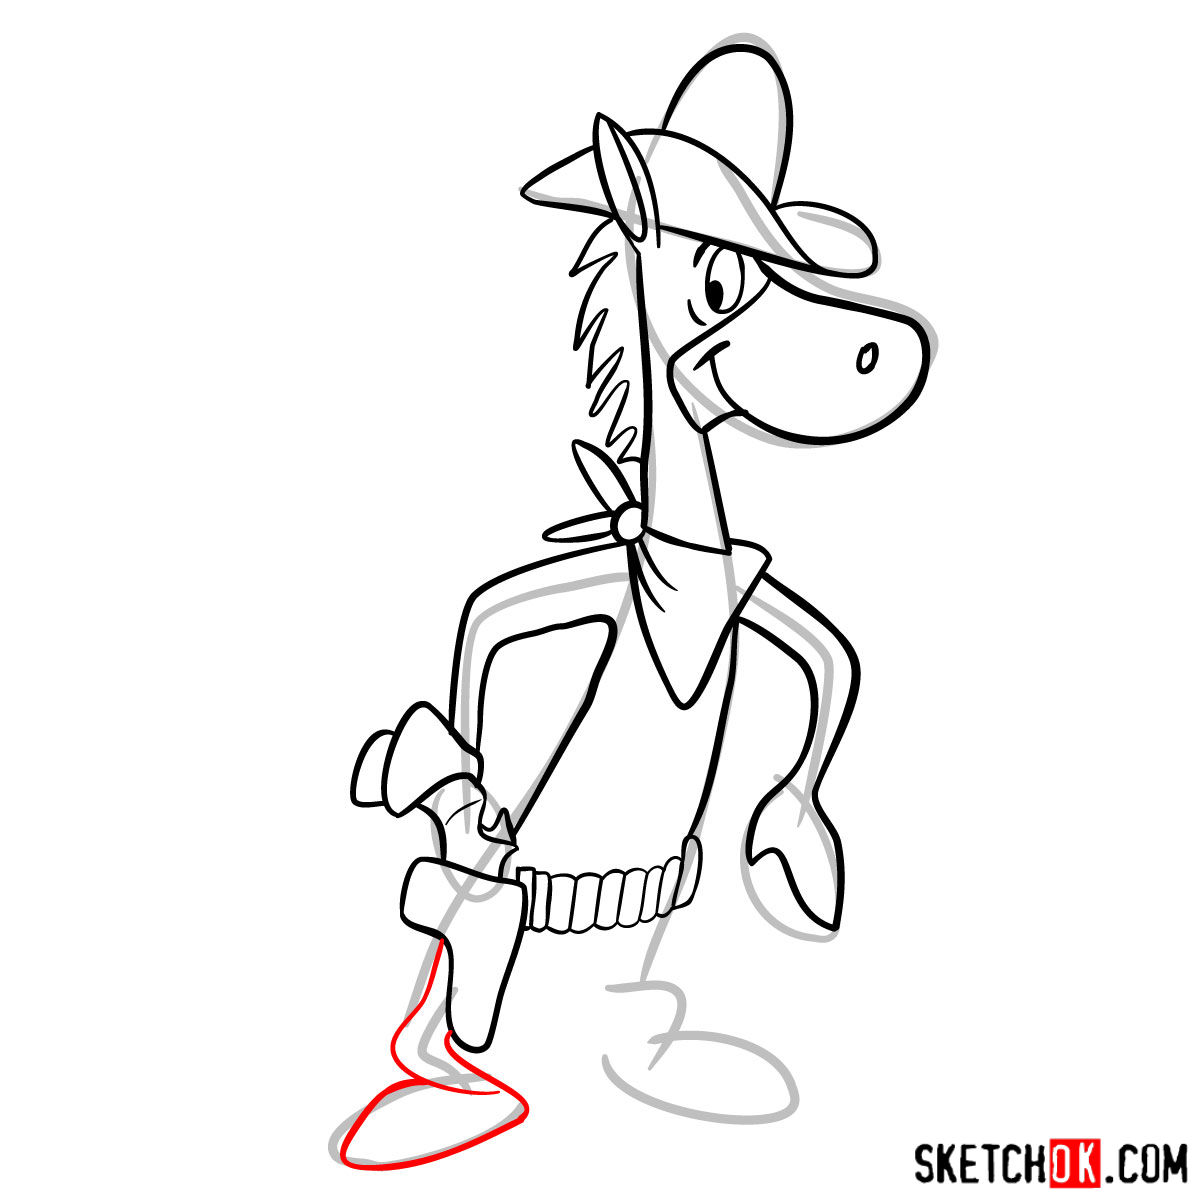 How to draw Quick Draw McGraw - step 08